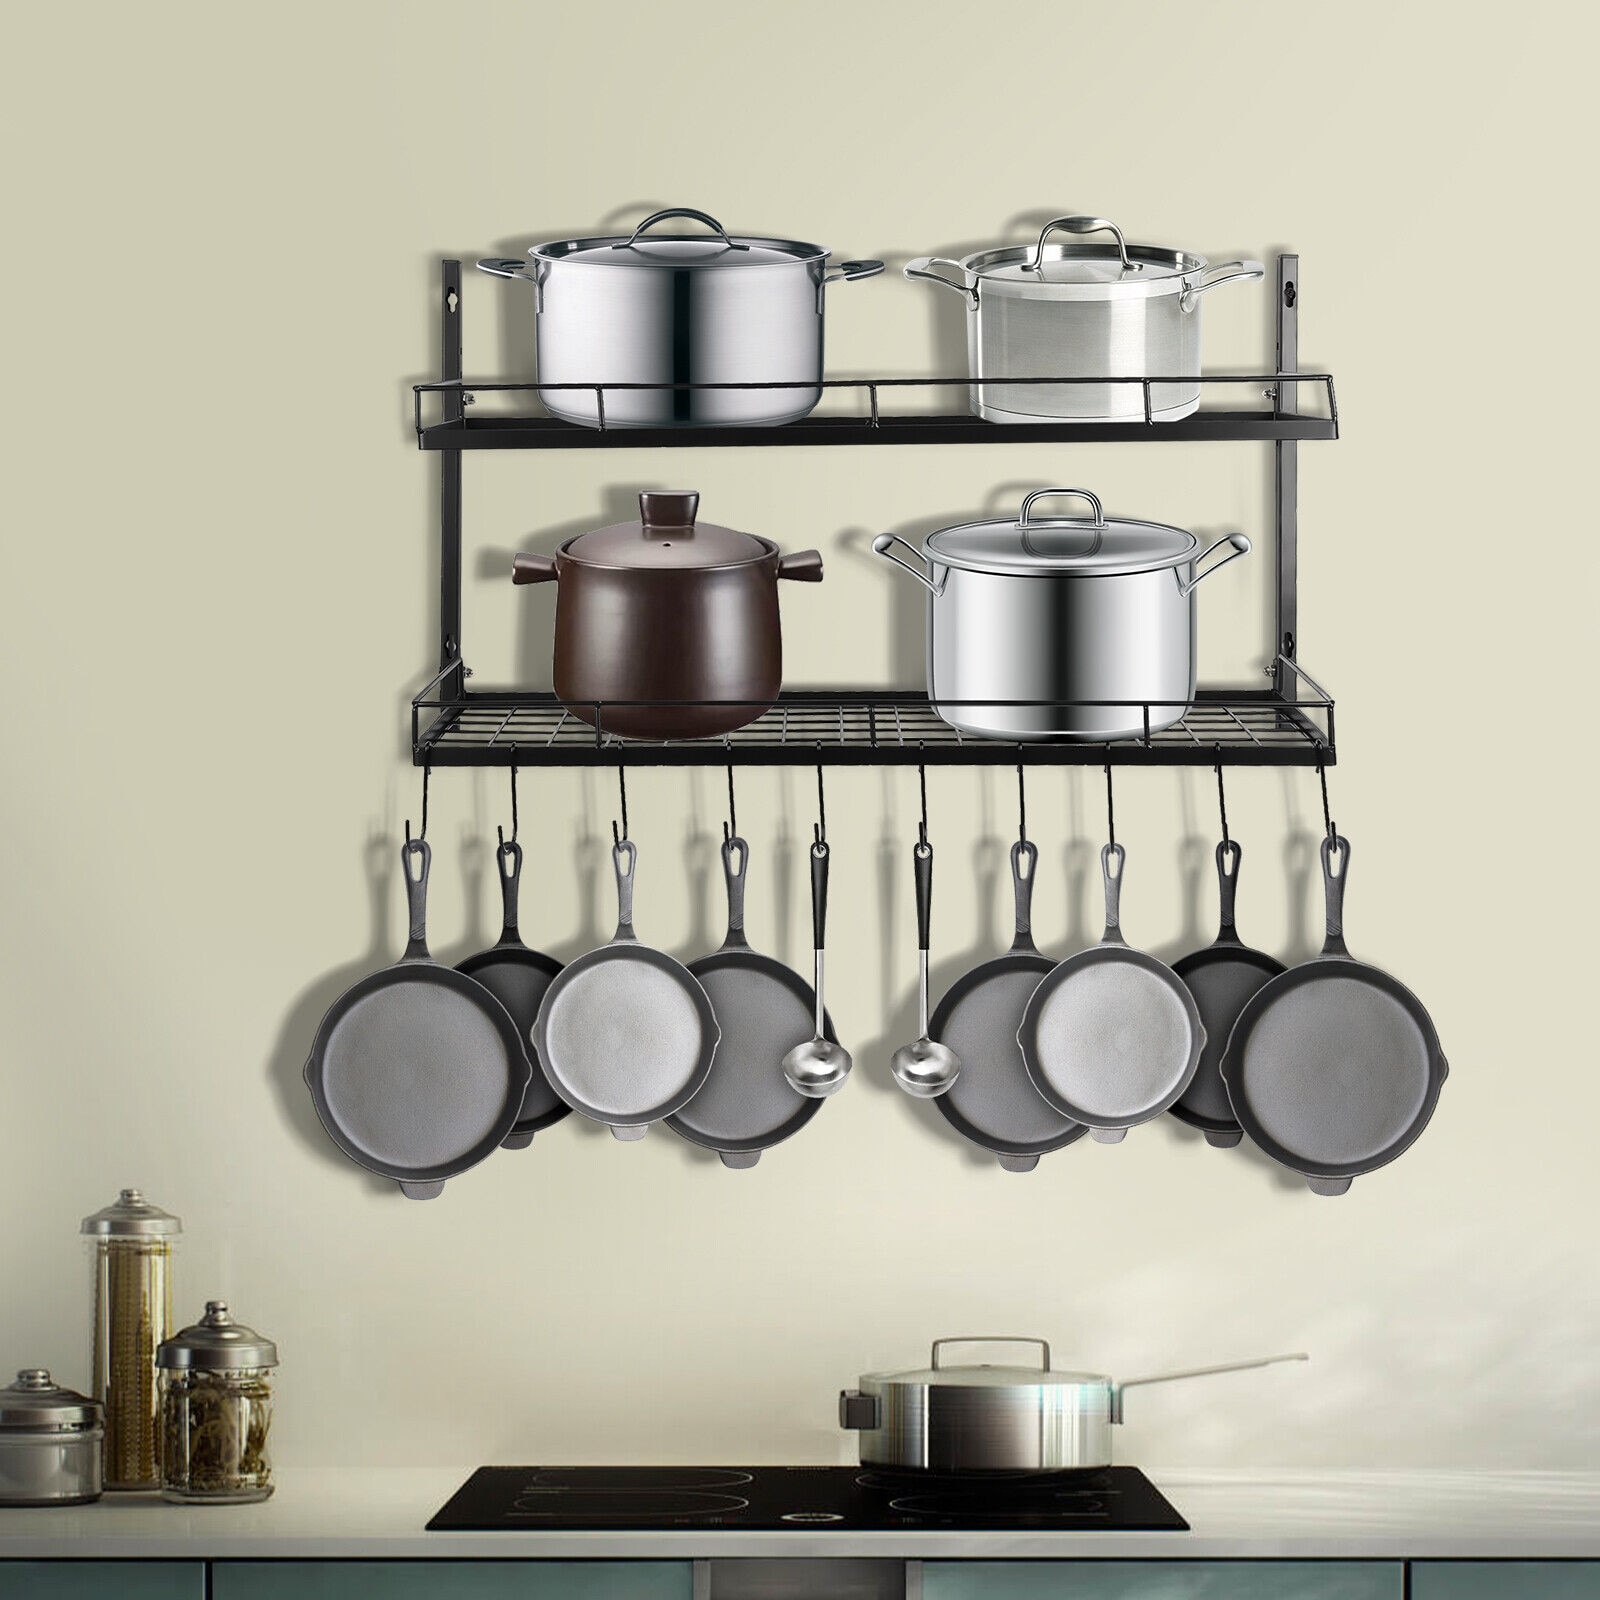 https://ak1.ostkcdn.com/images/products/is/images/direct/602a66ac43090b1e71d8d90d5fc903e9c0b9c7be/Kitchen-Wall-Mounted-2-Tiers-Pot-Pan-Rack-with-10-Hooks.jpg